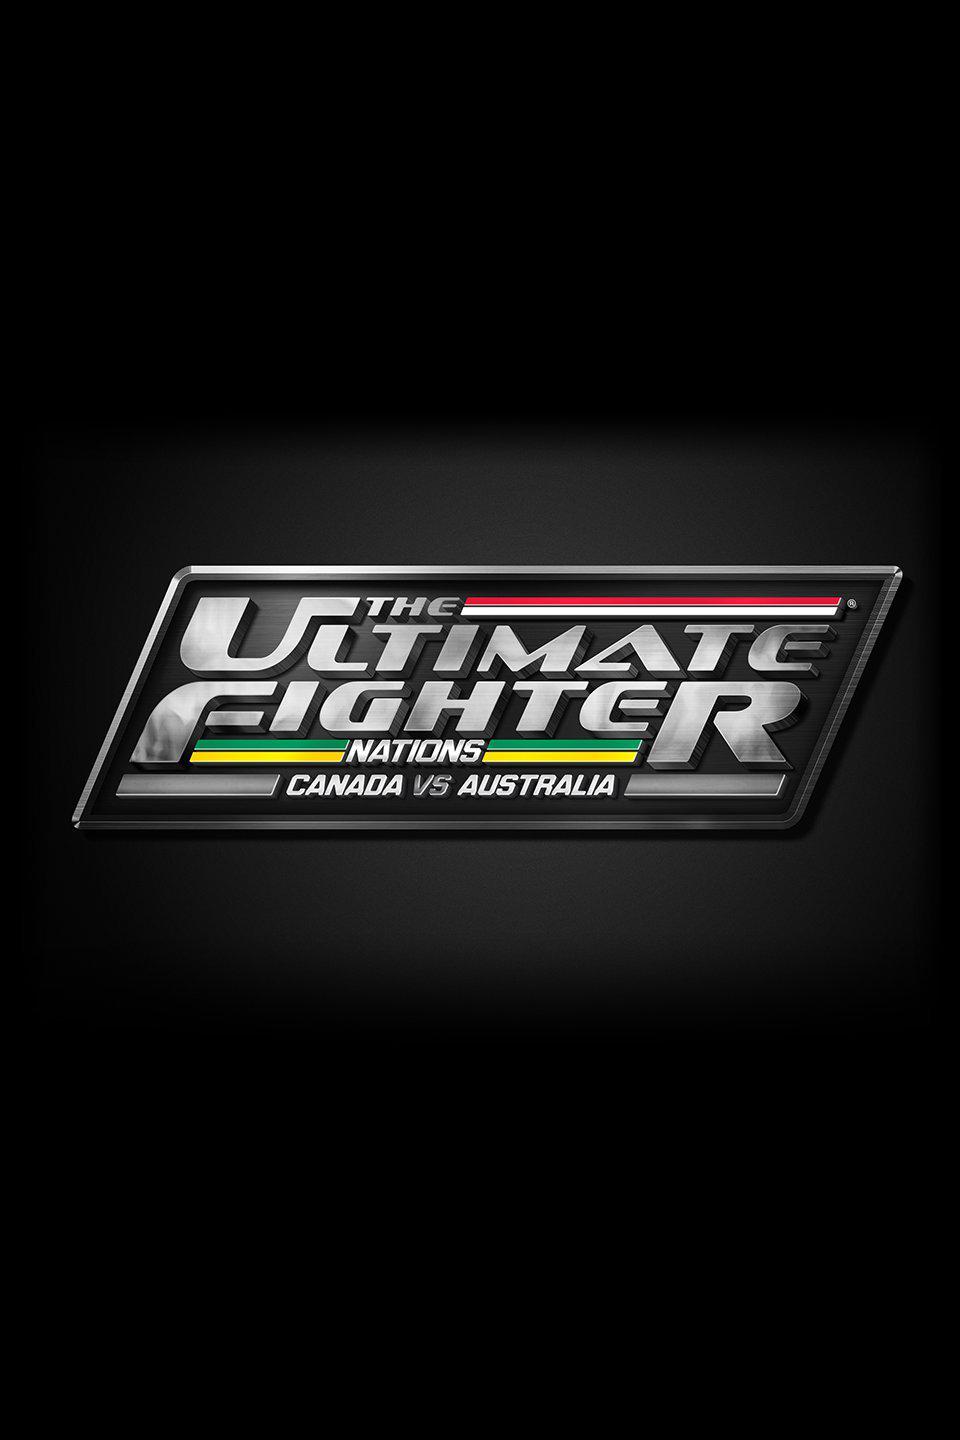 TV ratings for The Ultimate Fighter Nations: Canada Vs. Australia in Suecia. Fox Sports TV series